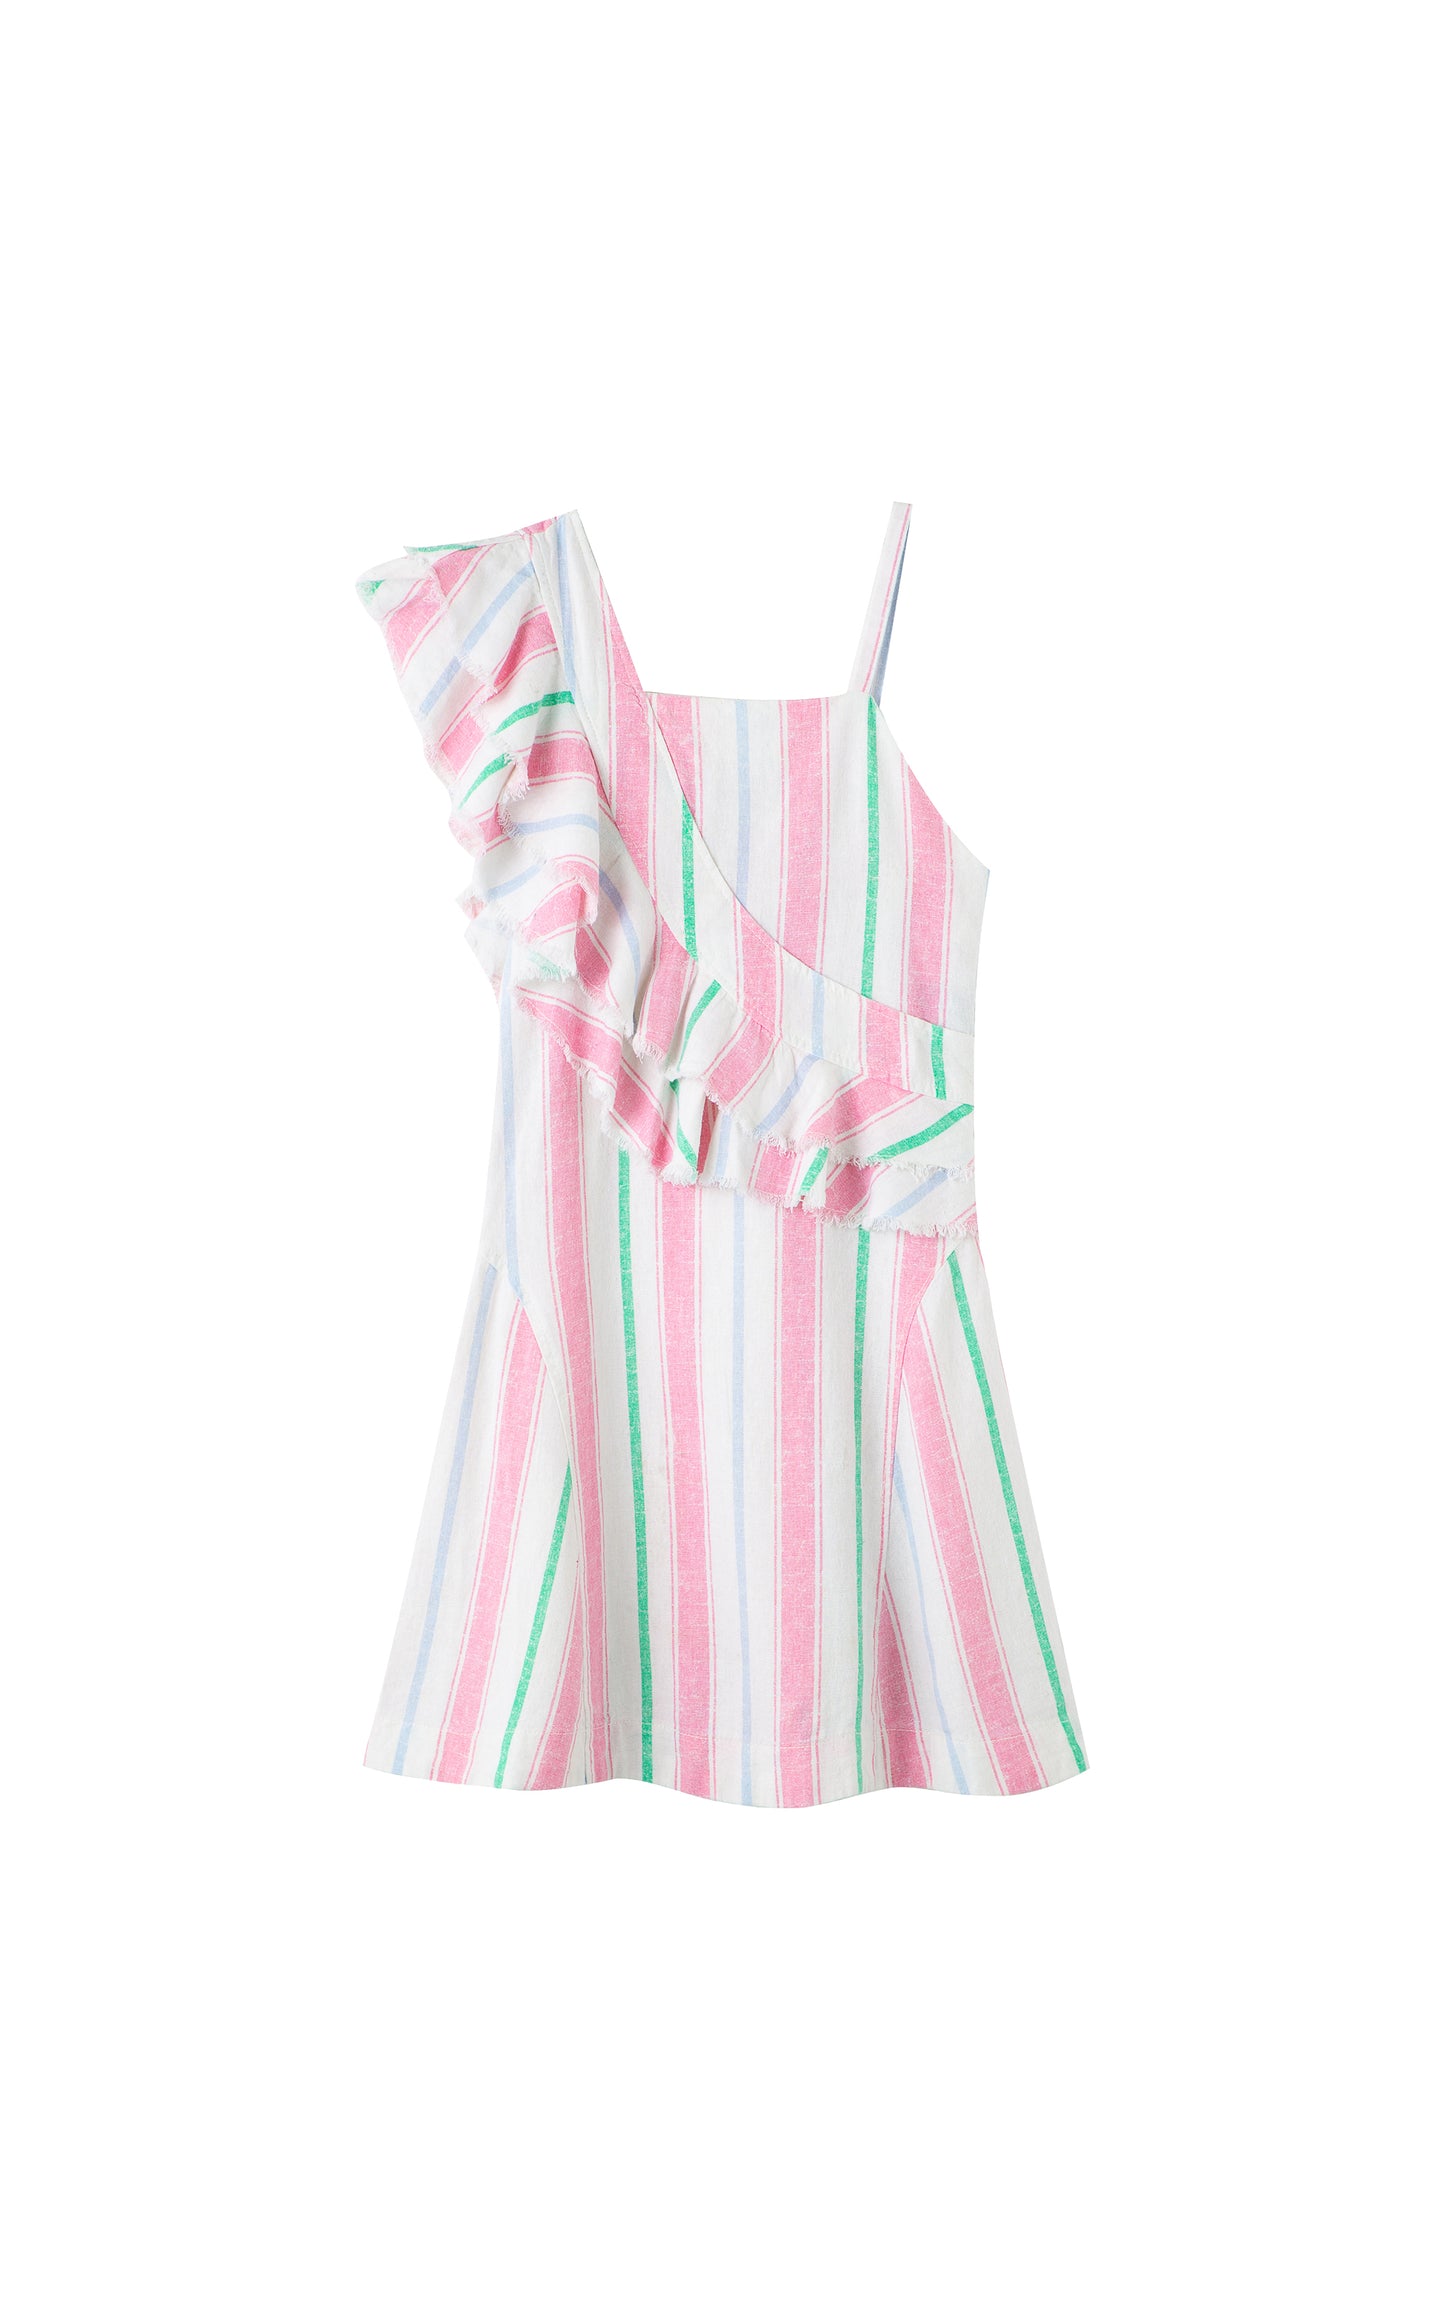 Pink, green and white striped one shoulder asymmetrical ruffle dress.